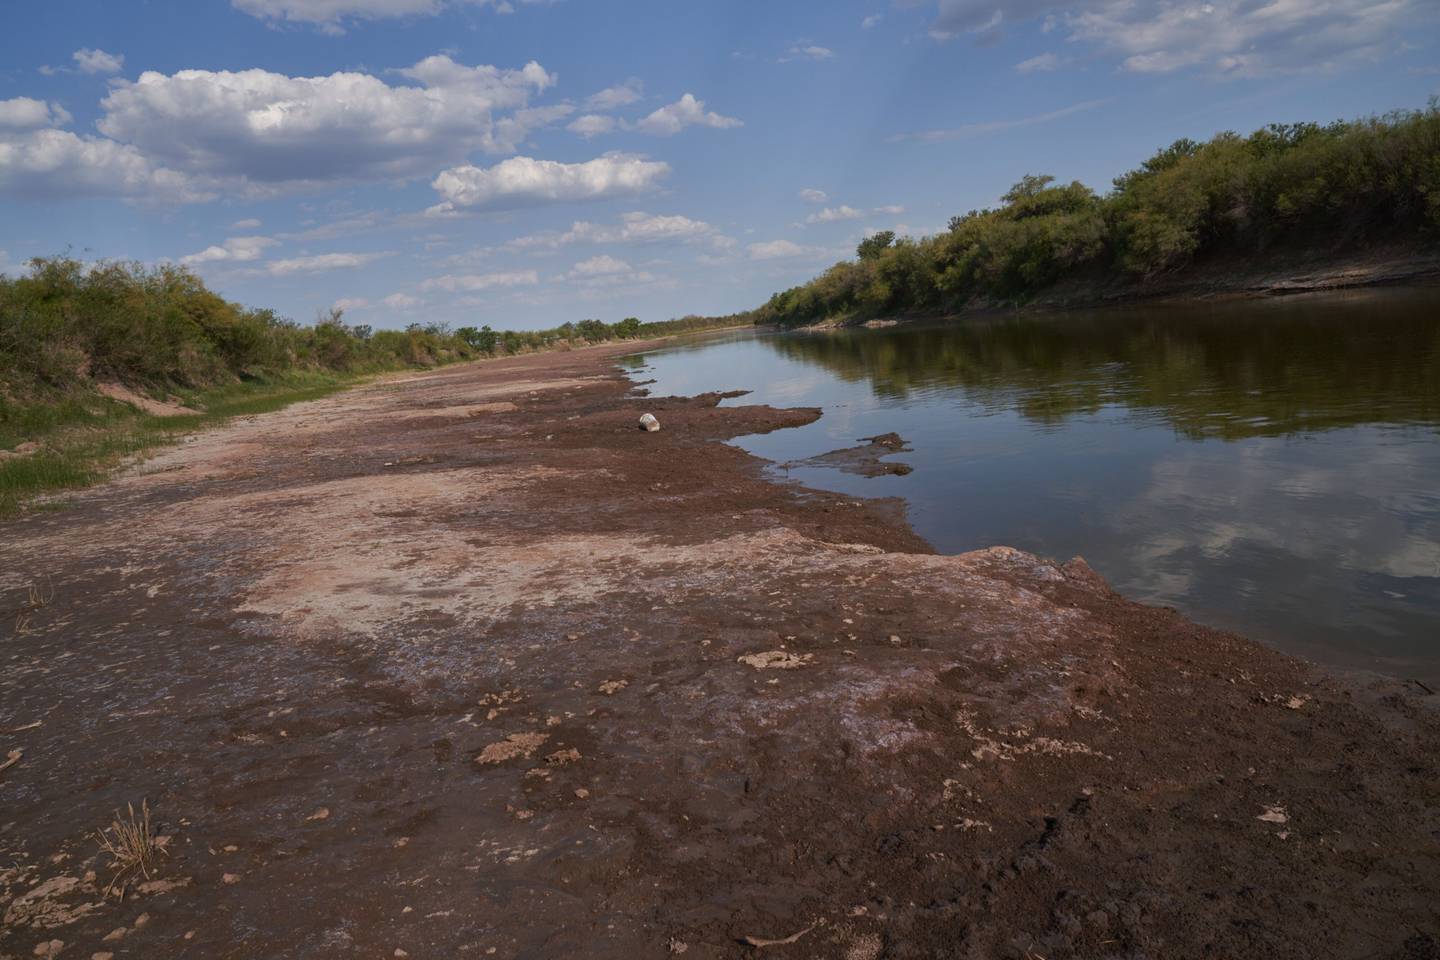 The Carcarana River with low water levels in San Jose de la Esquina, Argentina, on Jan. 16, 2023.